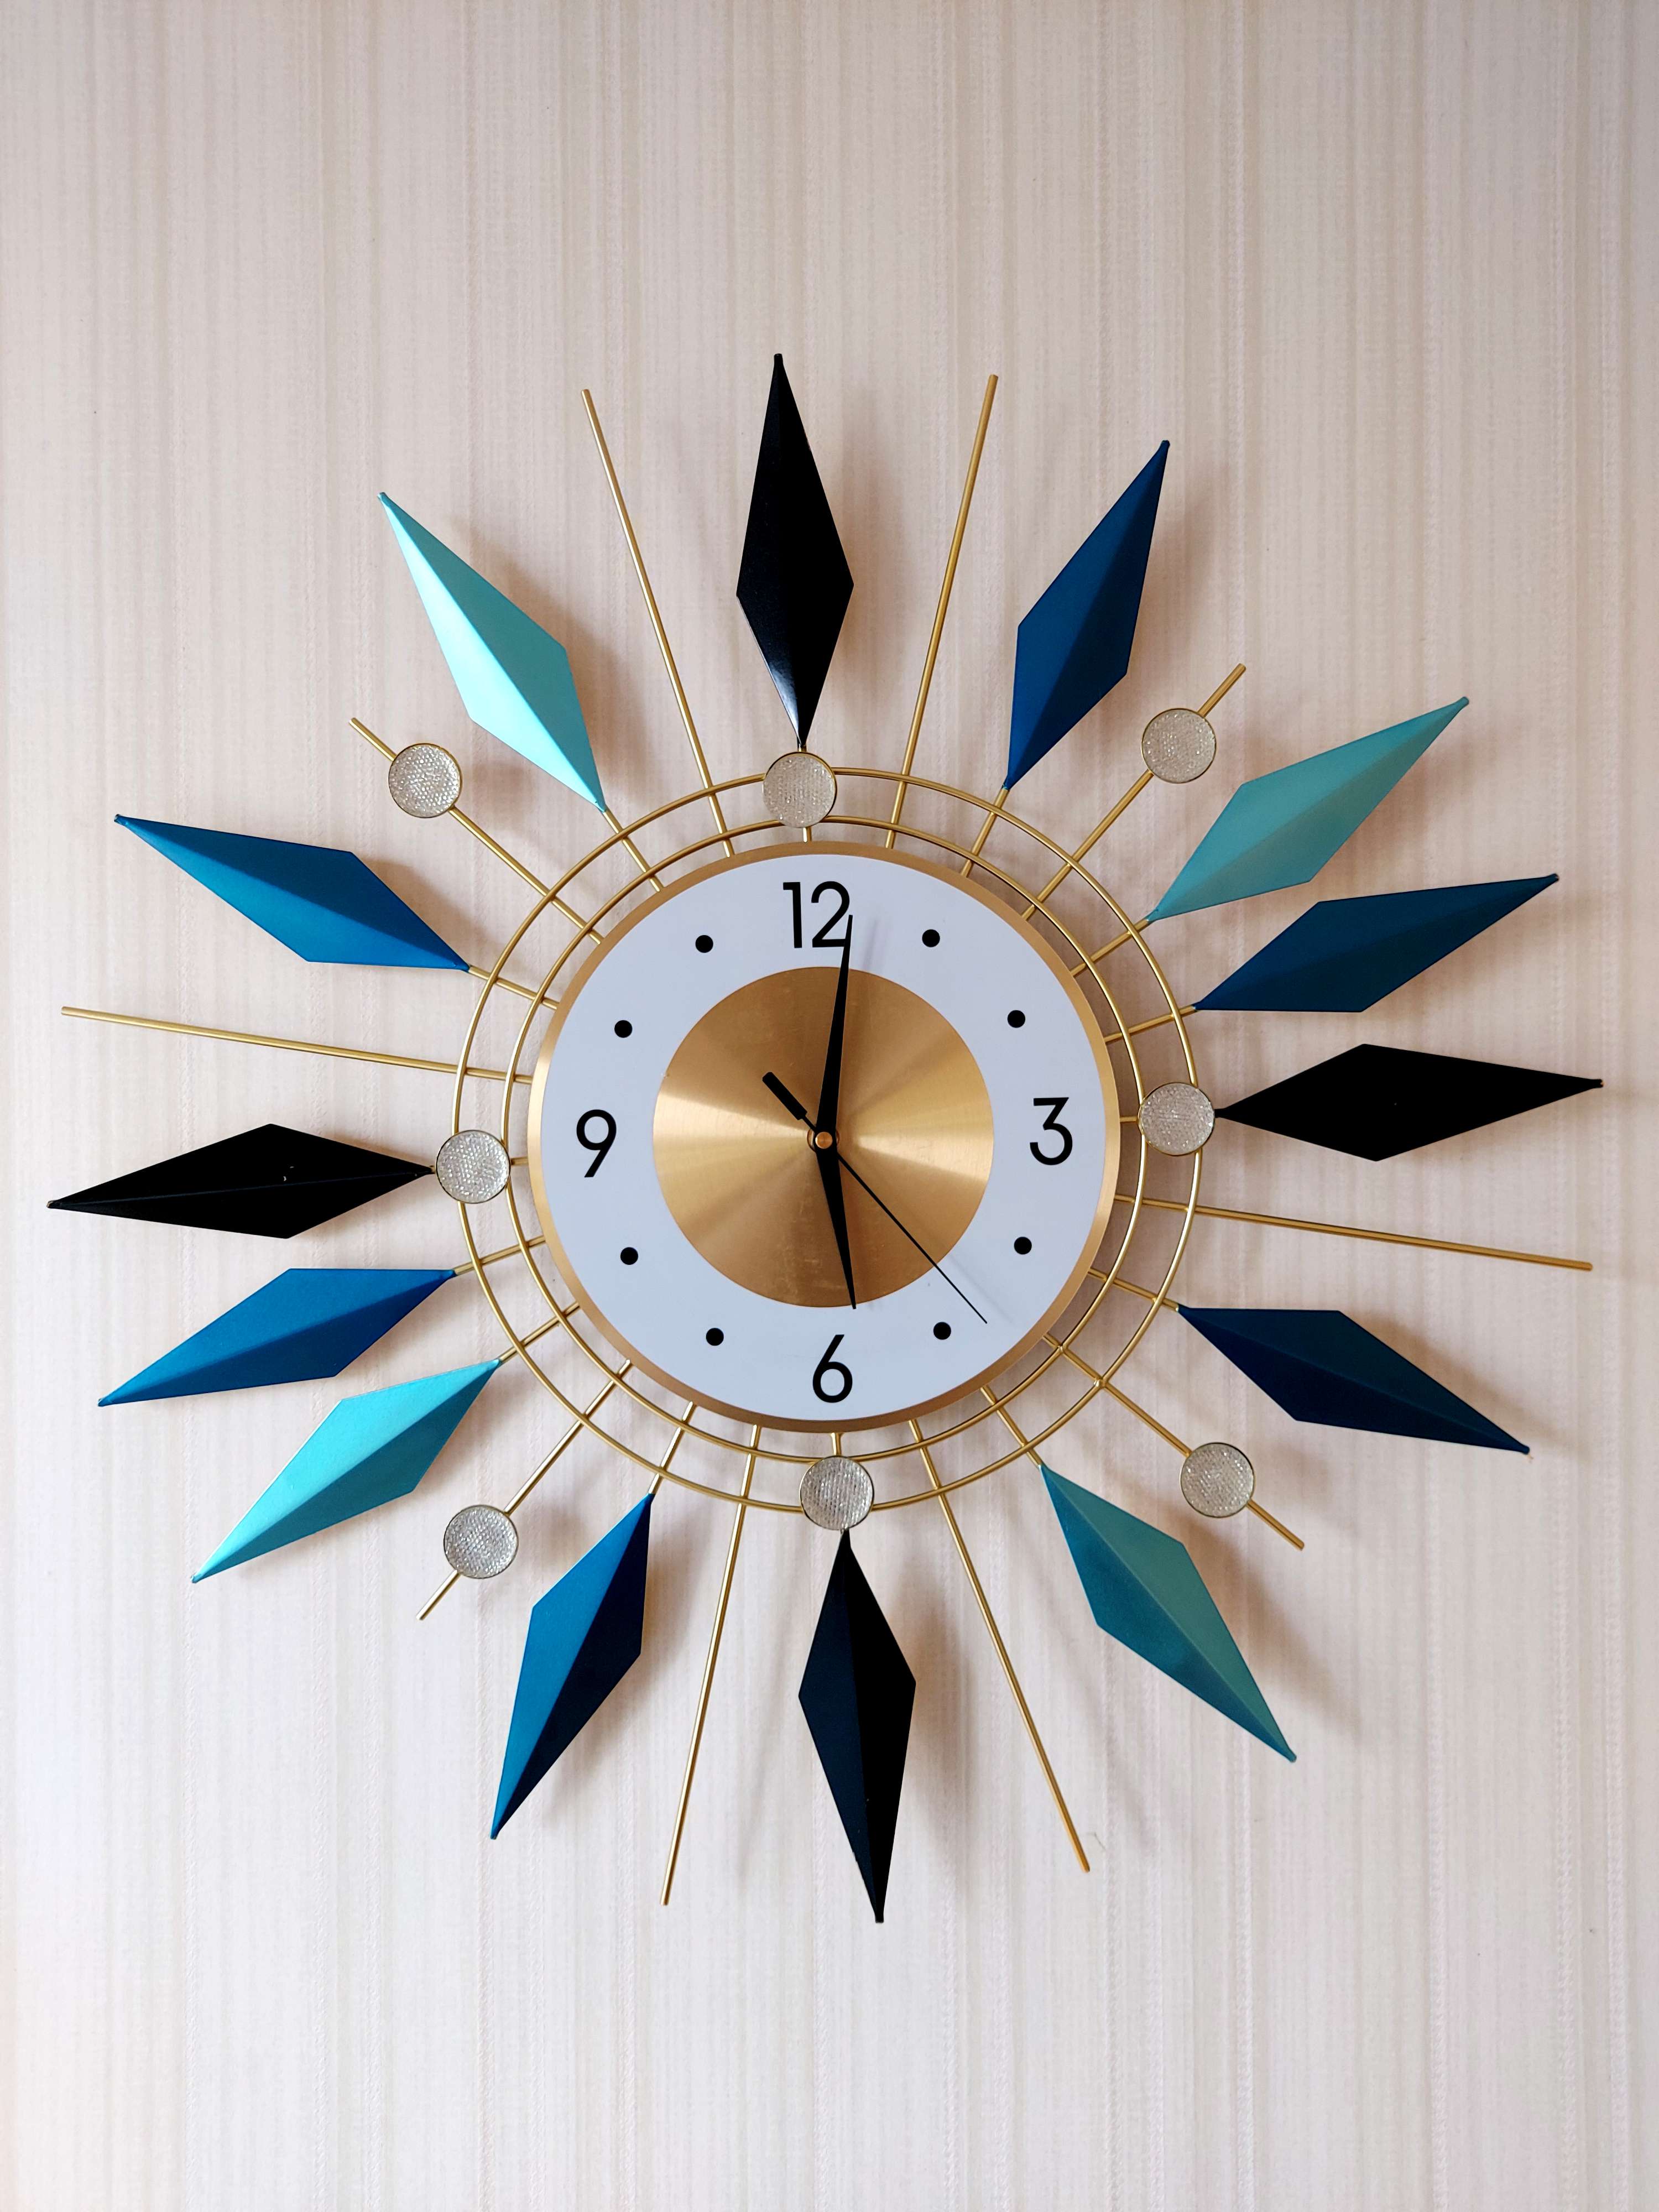 FunkyTradition Royal Multicolor 3D Star Wall Clock for Home Office Decor and Gifts 60 CM Tall